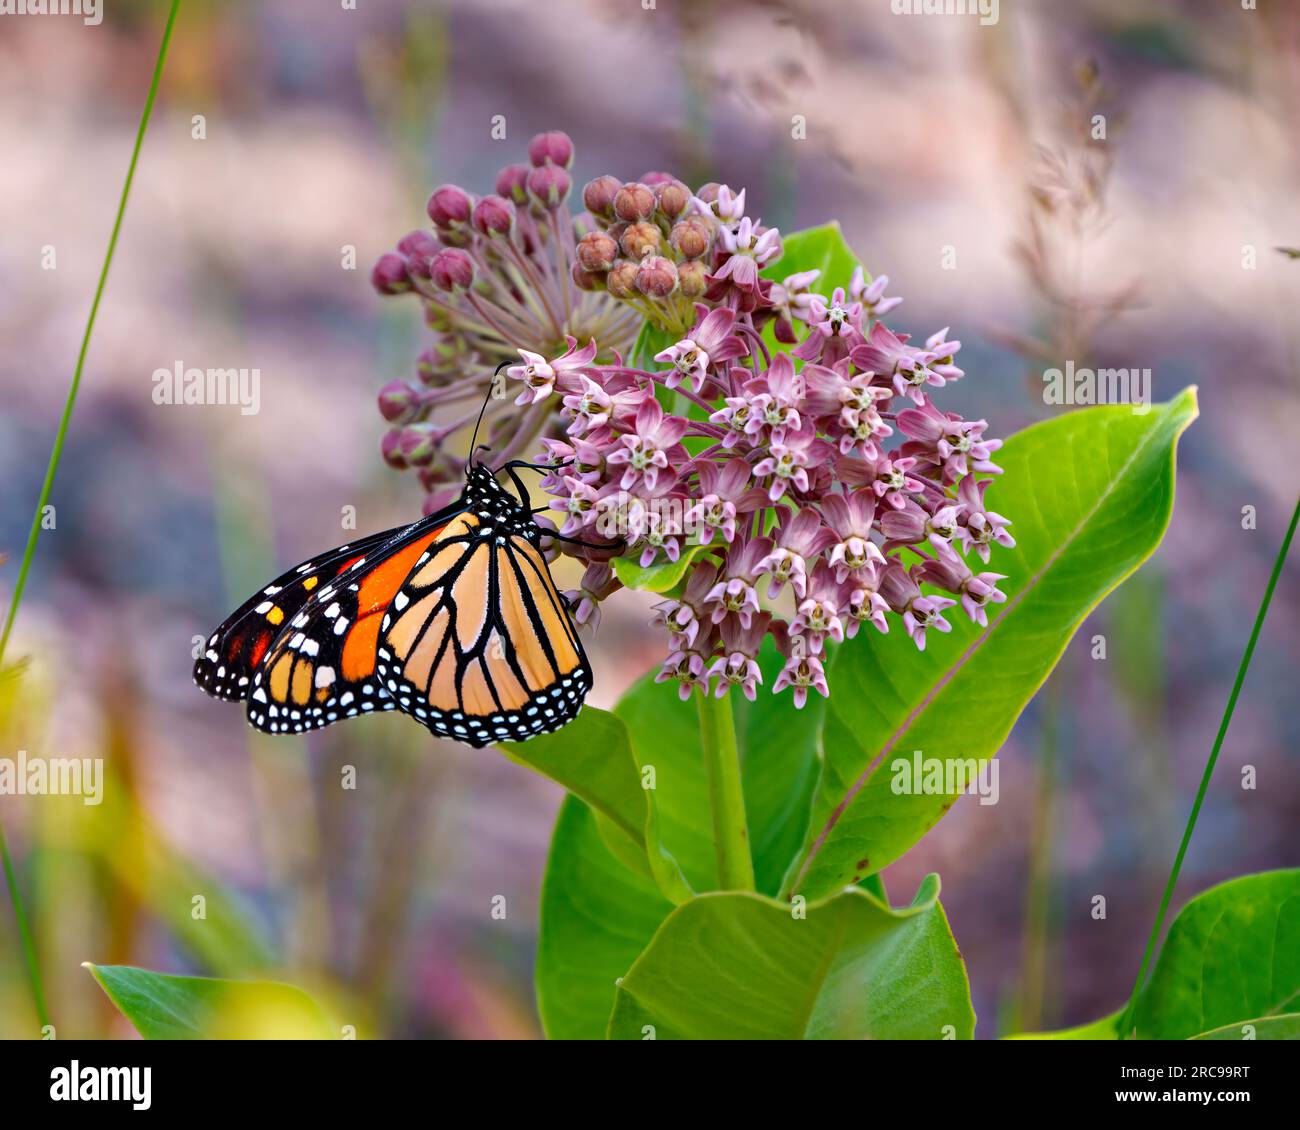 Monarch Butterfly close-up side view sipping or drinking nectar from a milkweed plant with a colourful background in its environment and habitat. Stock Photo